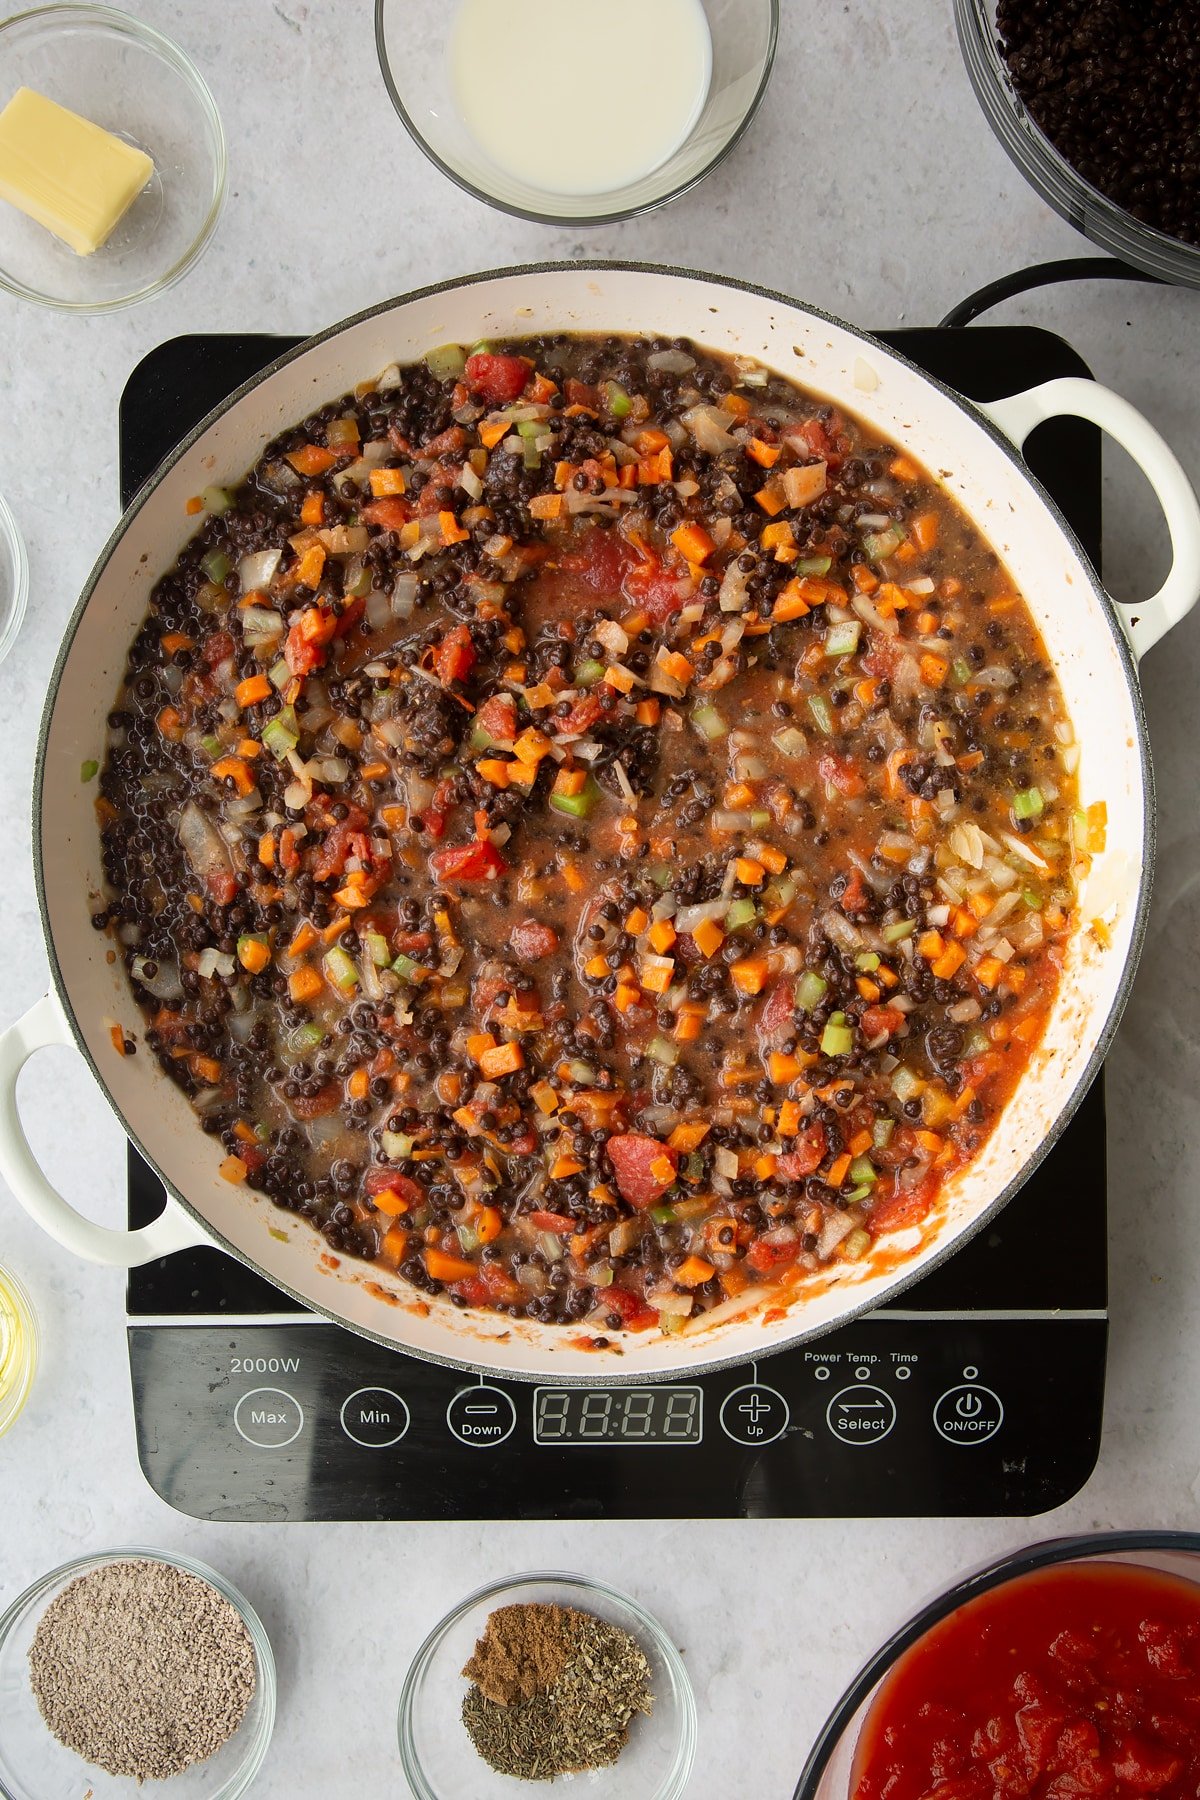 a large frying pan on an induction hob with mixed vegetables, brown lentils and tinned tomatos mixed together.